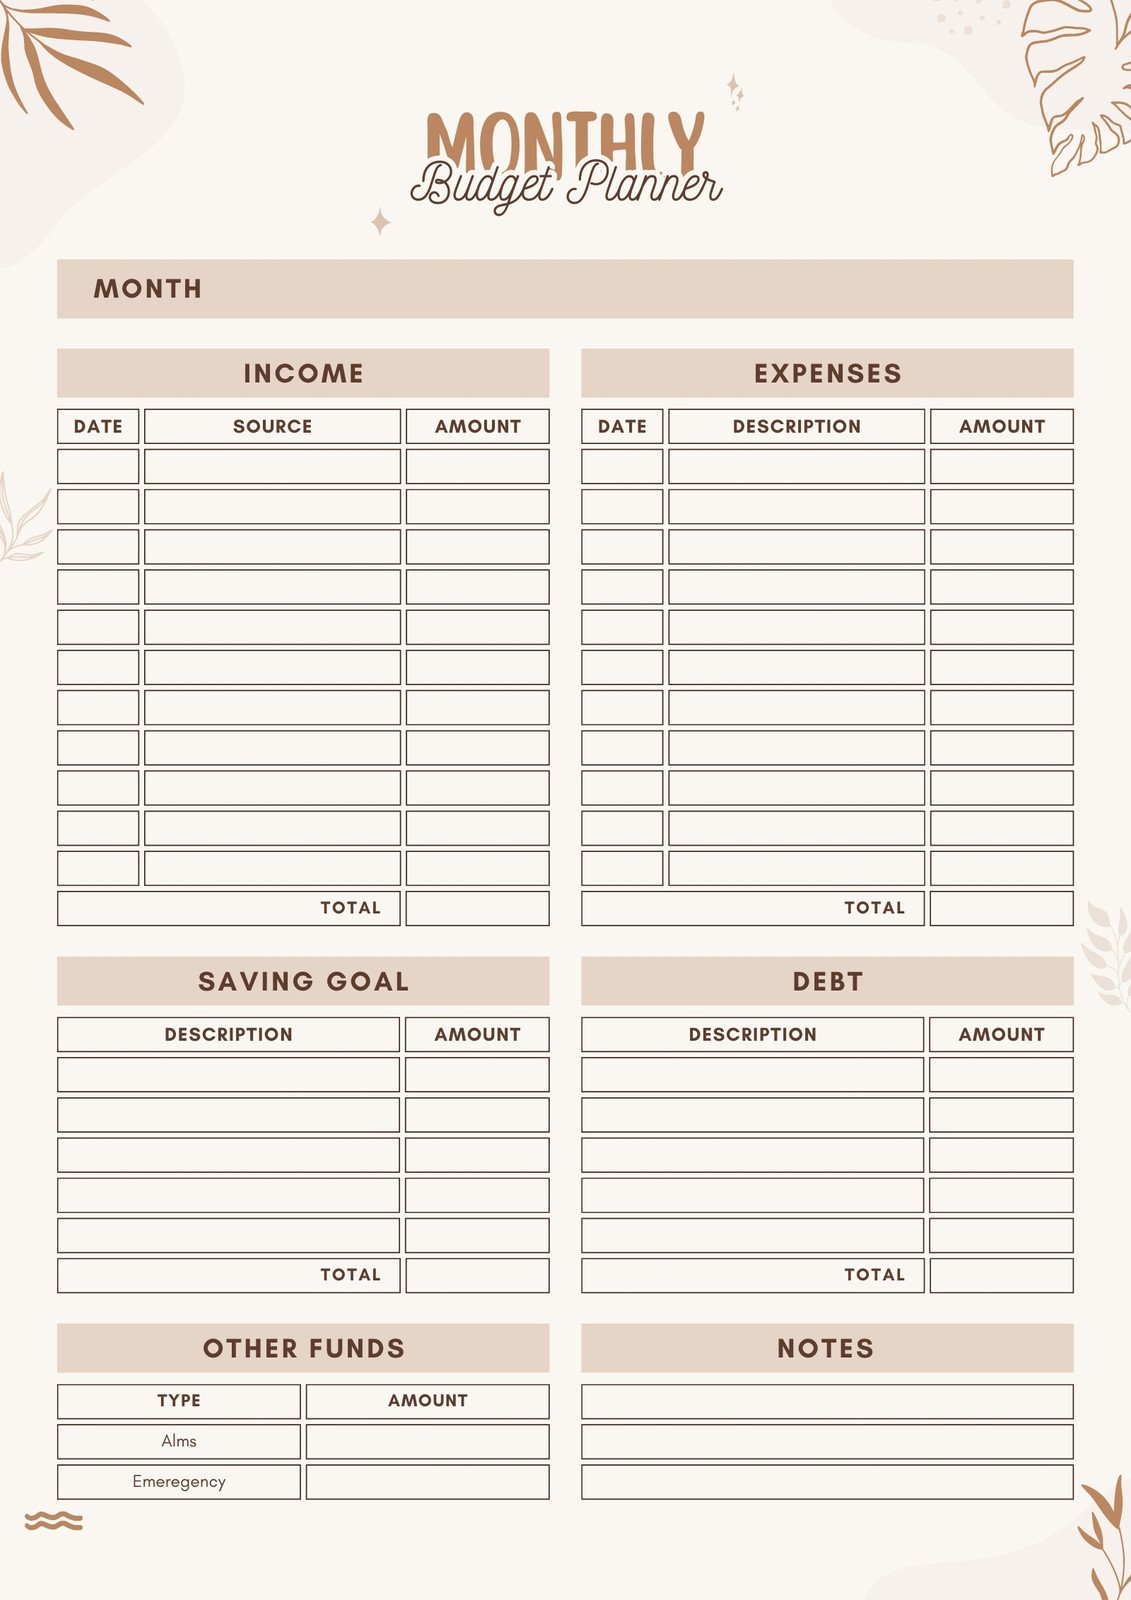 Budget Planner / Financial Tracking Sheets (Canva Template - OK to Resell)